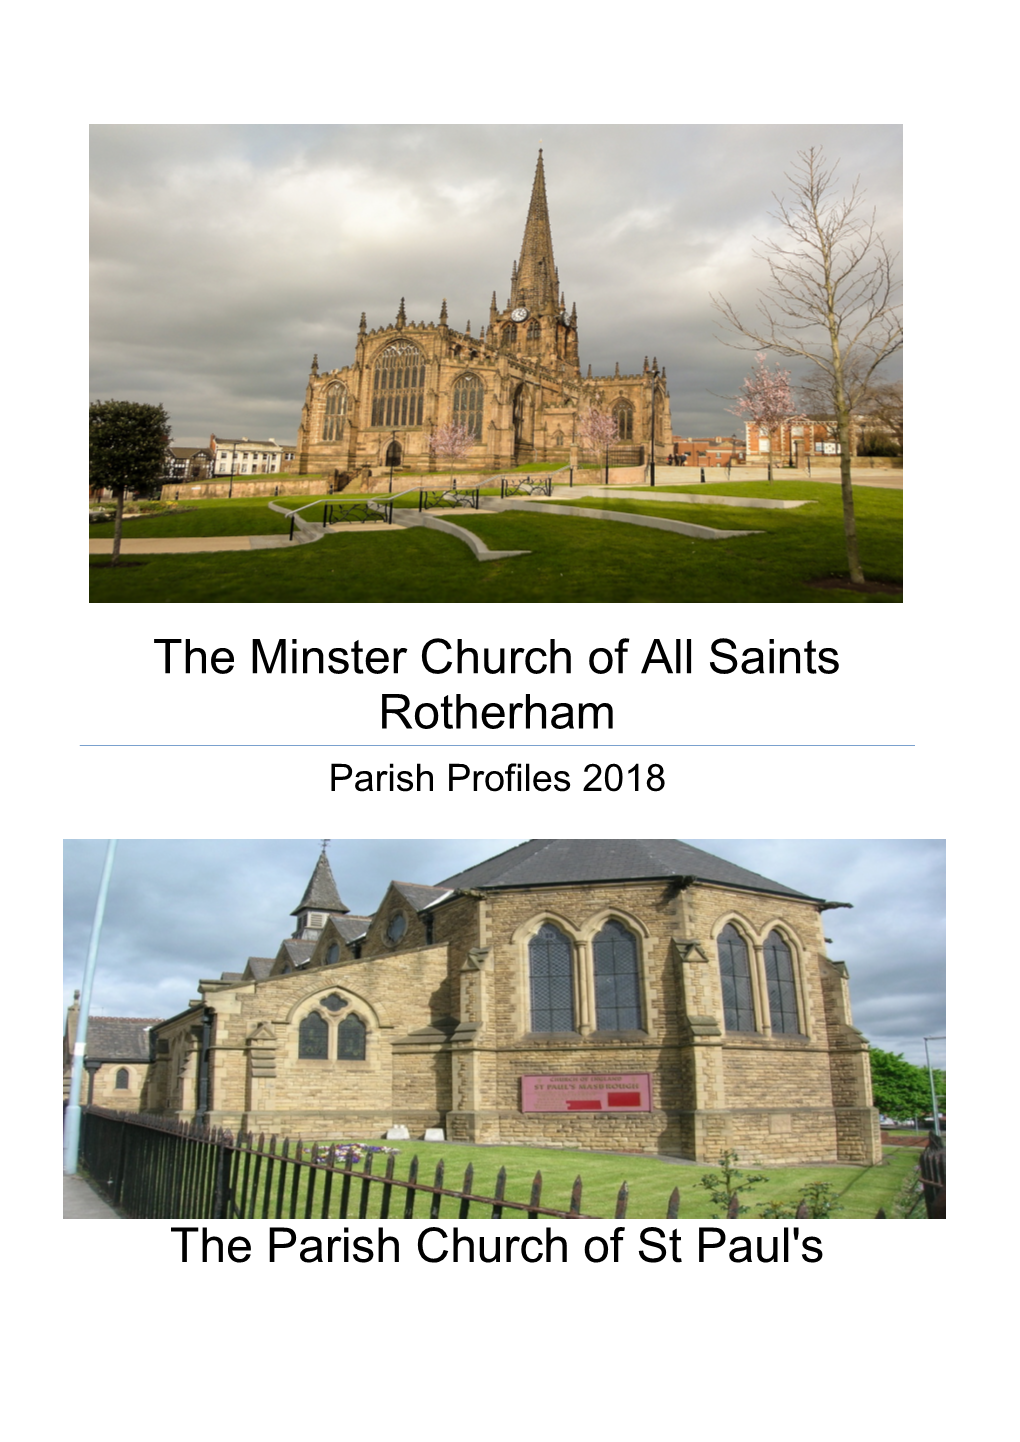 The Minster Church of All Saints Rotherham the Parish Church of St